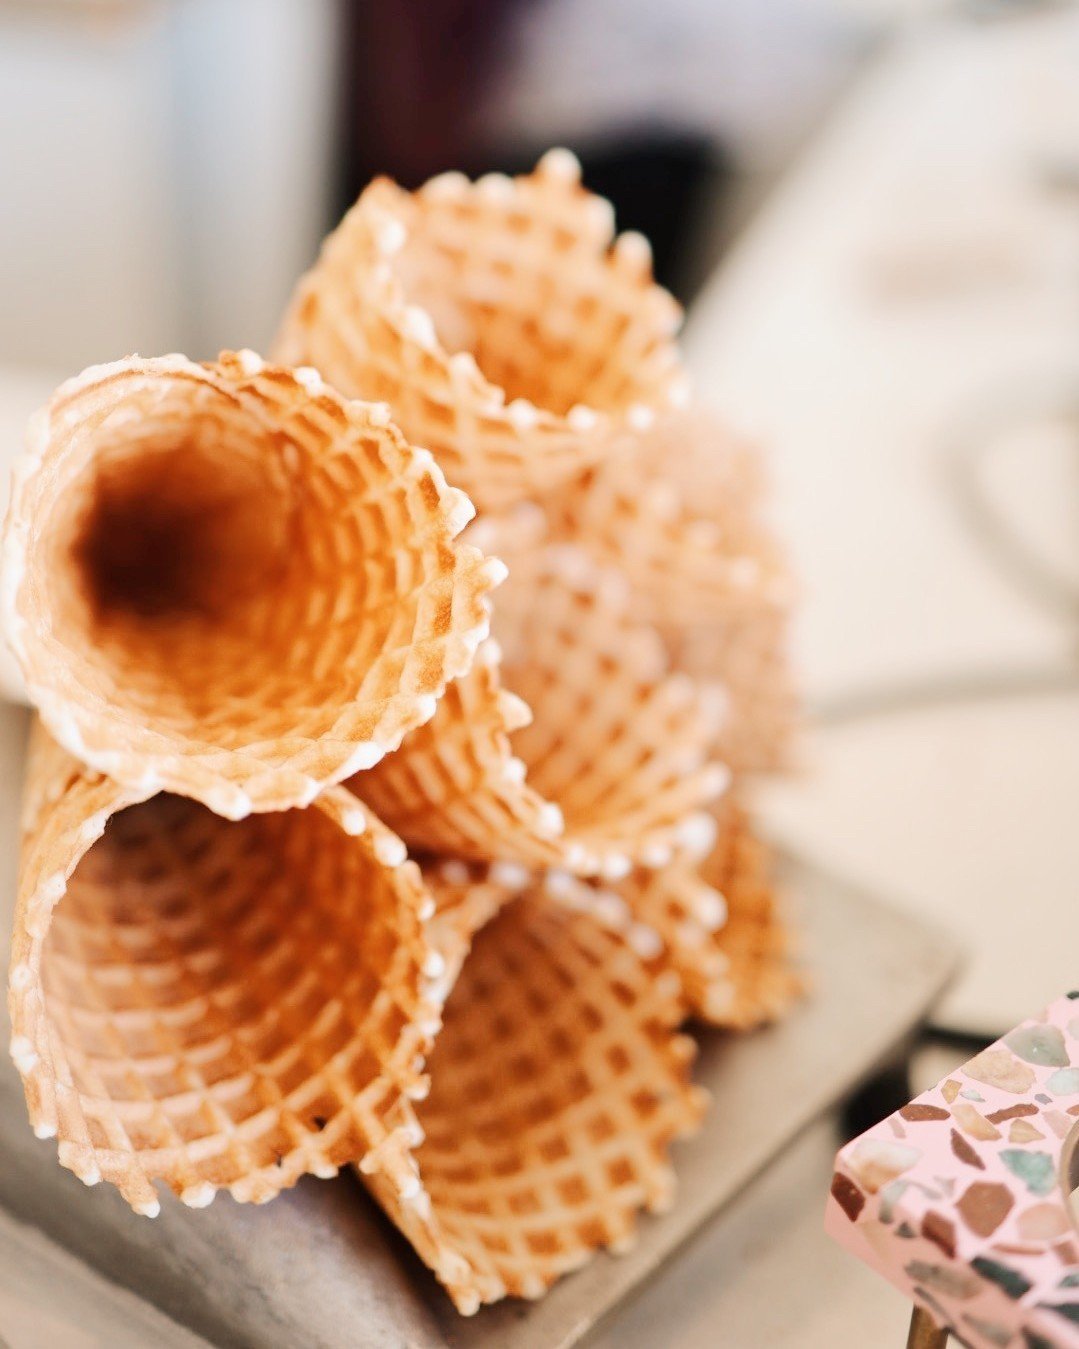 We take our waffle cones kinda seriously - using only a few simple ingredients mixed daily, we individually bake and roll them to crispy, buttery perfection. In the summertime we start early and roll all day long, and if you ask our shop team, most o